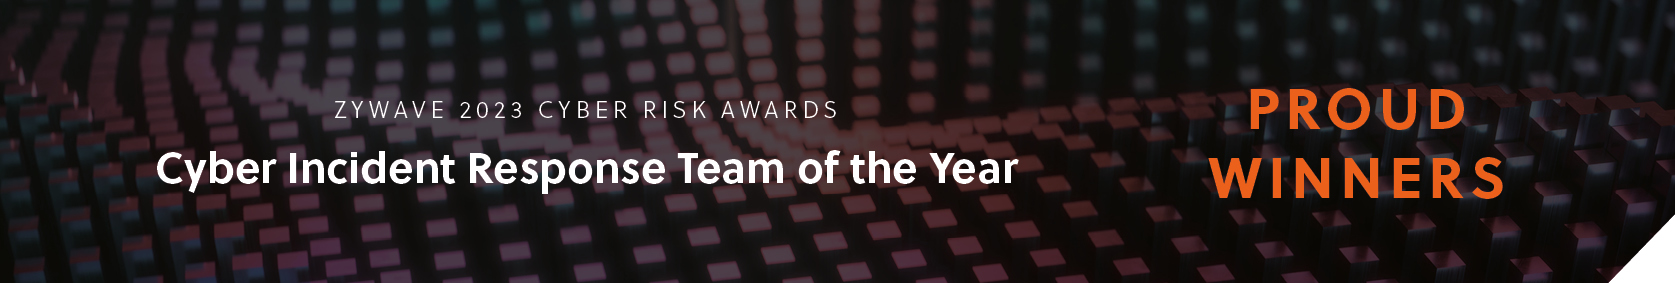 Cyber Incident Response Team of the Year